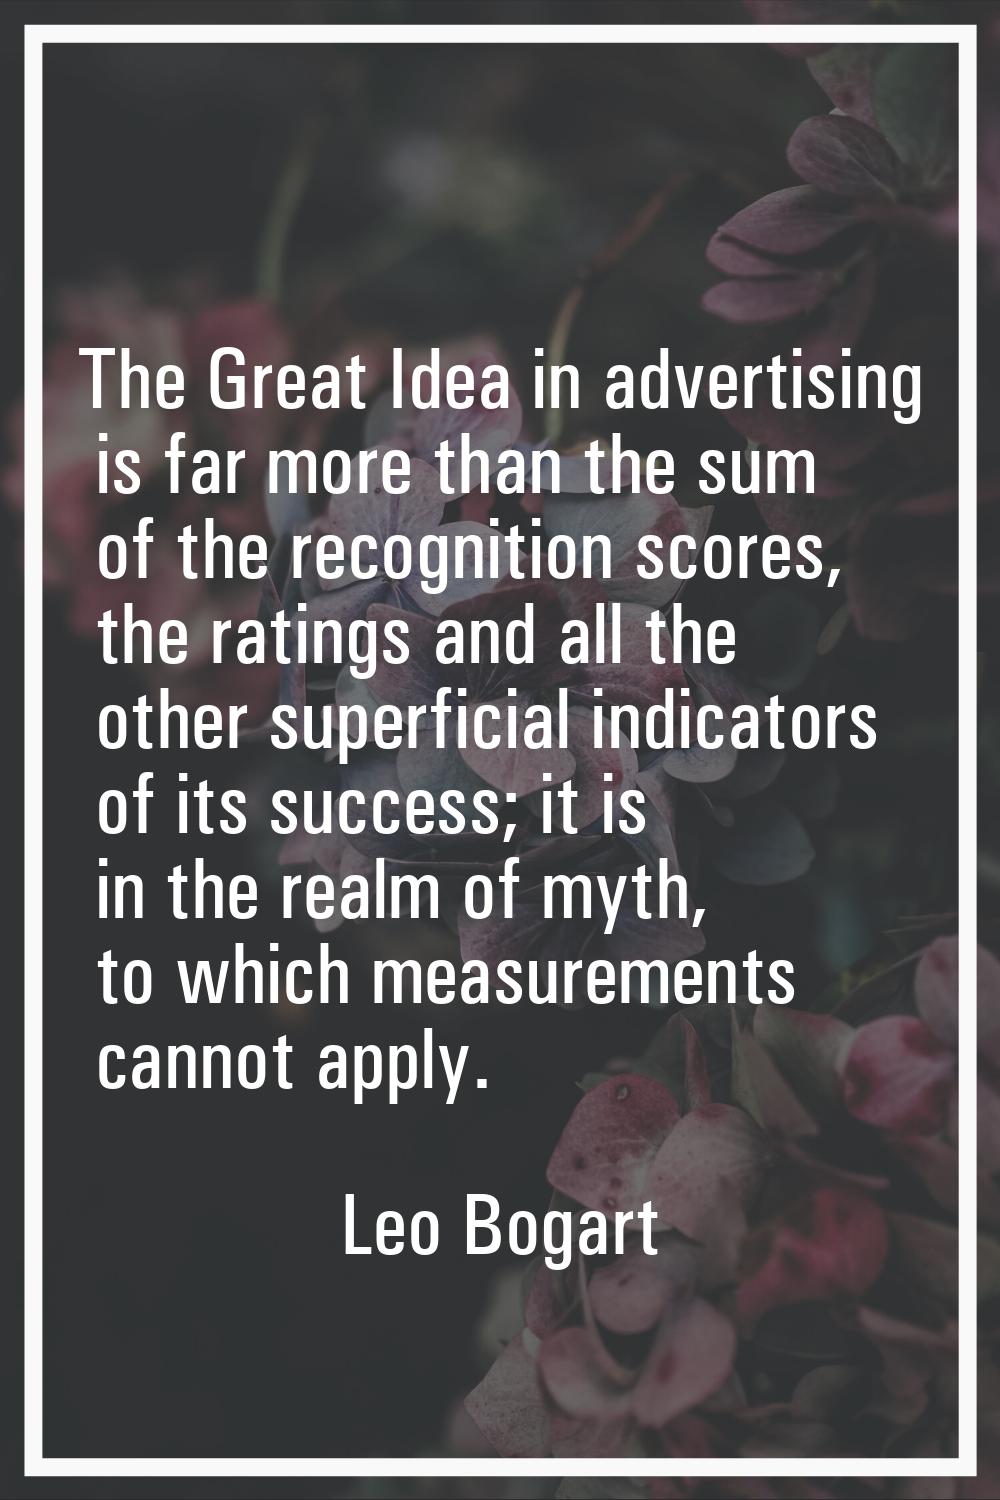 The Great Idea in advertising is far more than the sum of the recognition scores, the ratings and a